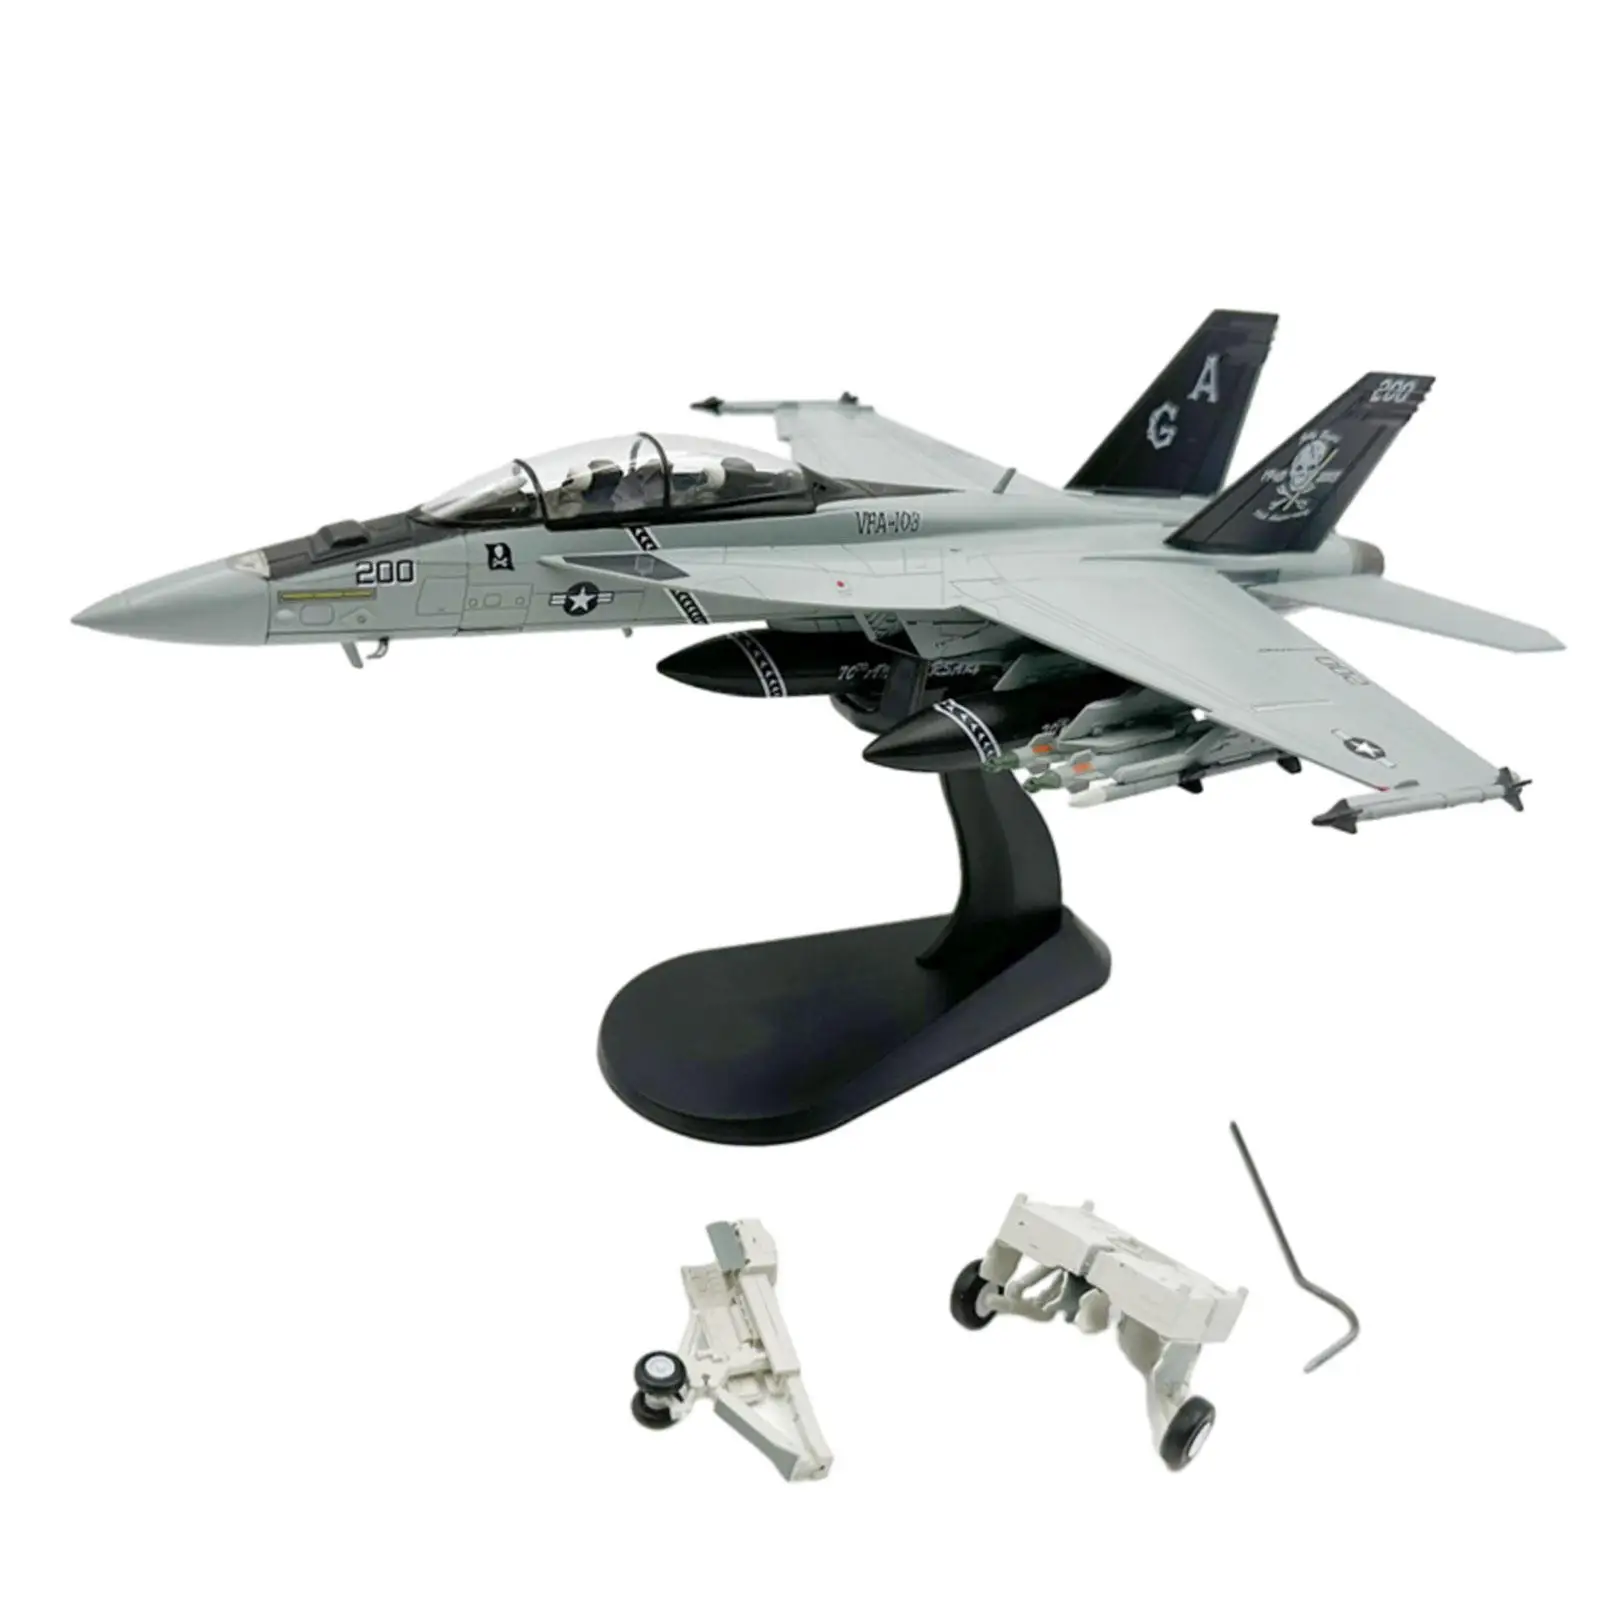 Airplane Model Metal Aircraft Model Collectibles, Diecast Aircraft Model 1/72 Fighter Model for Shelf